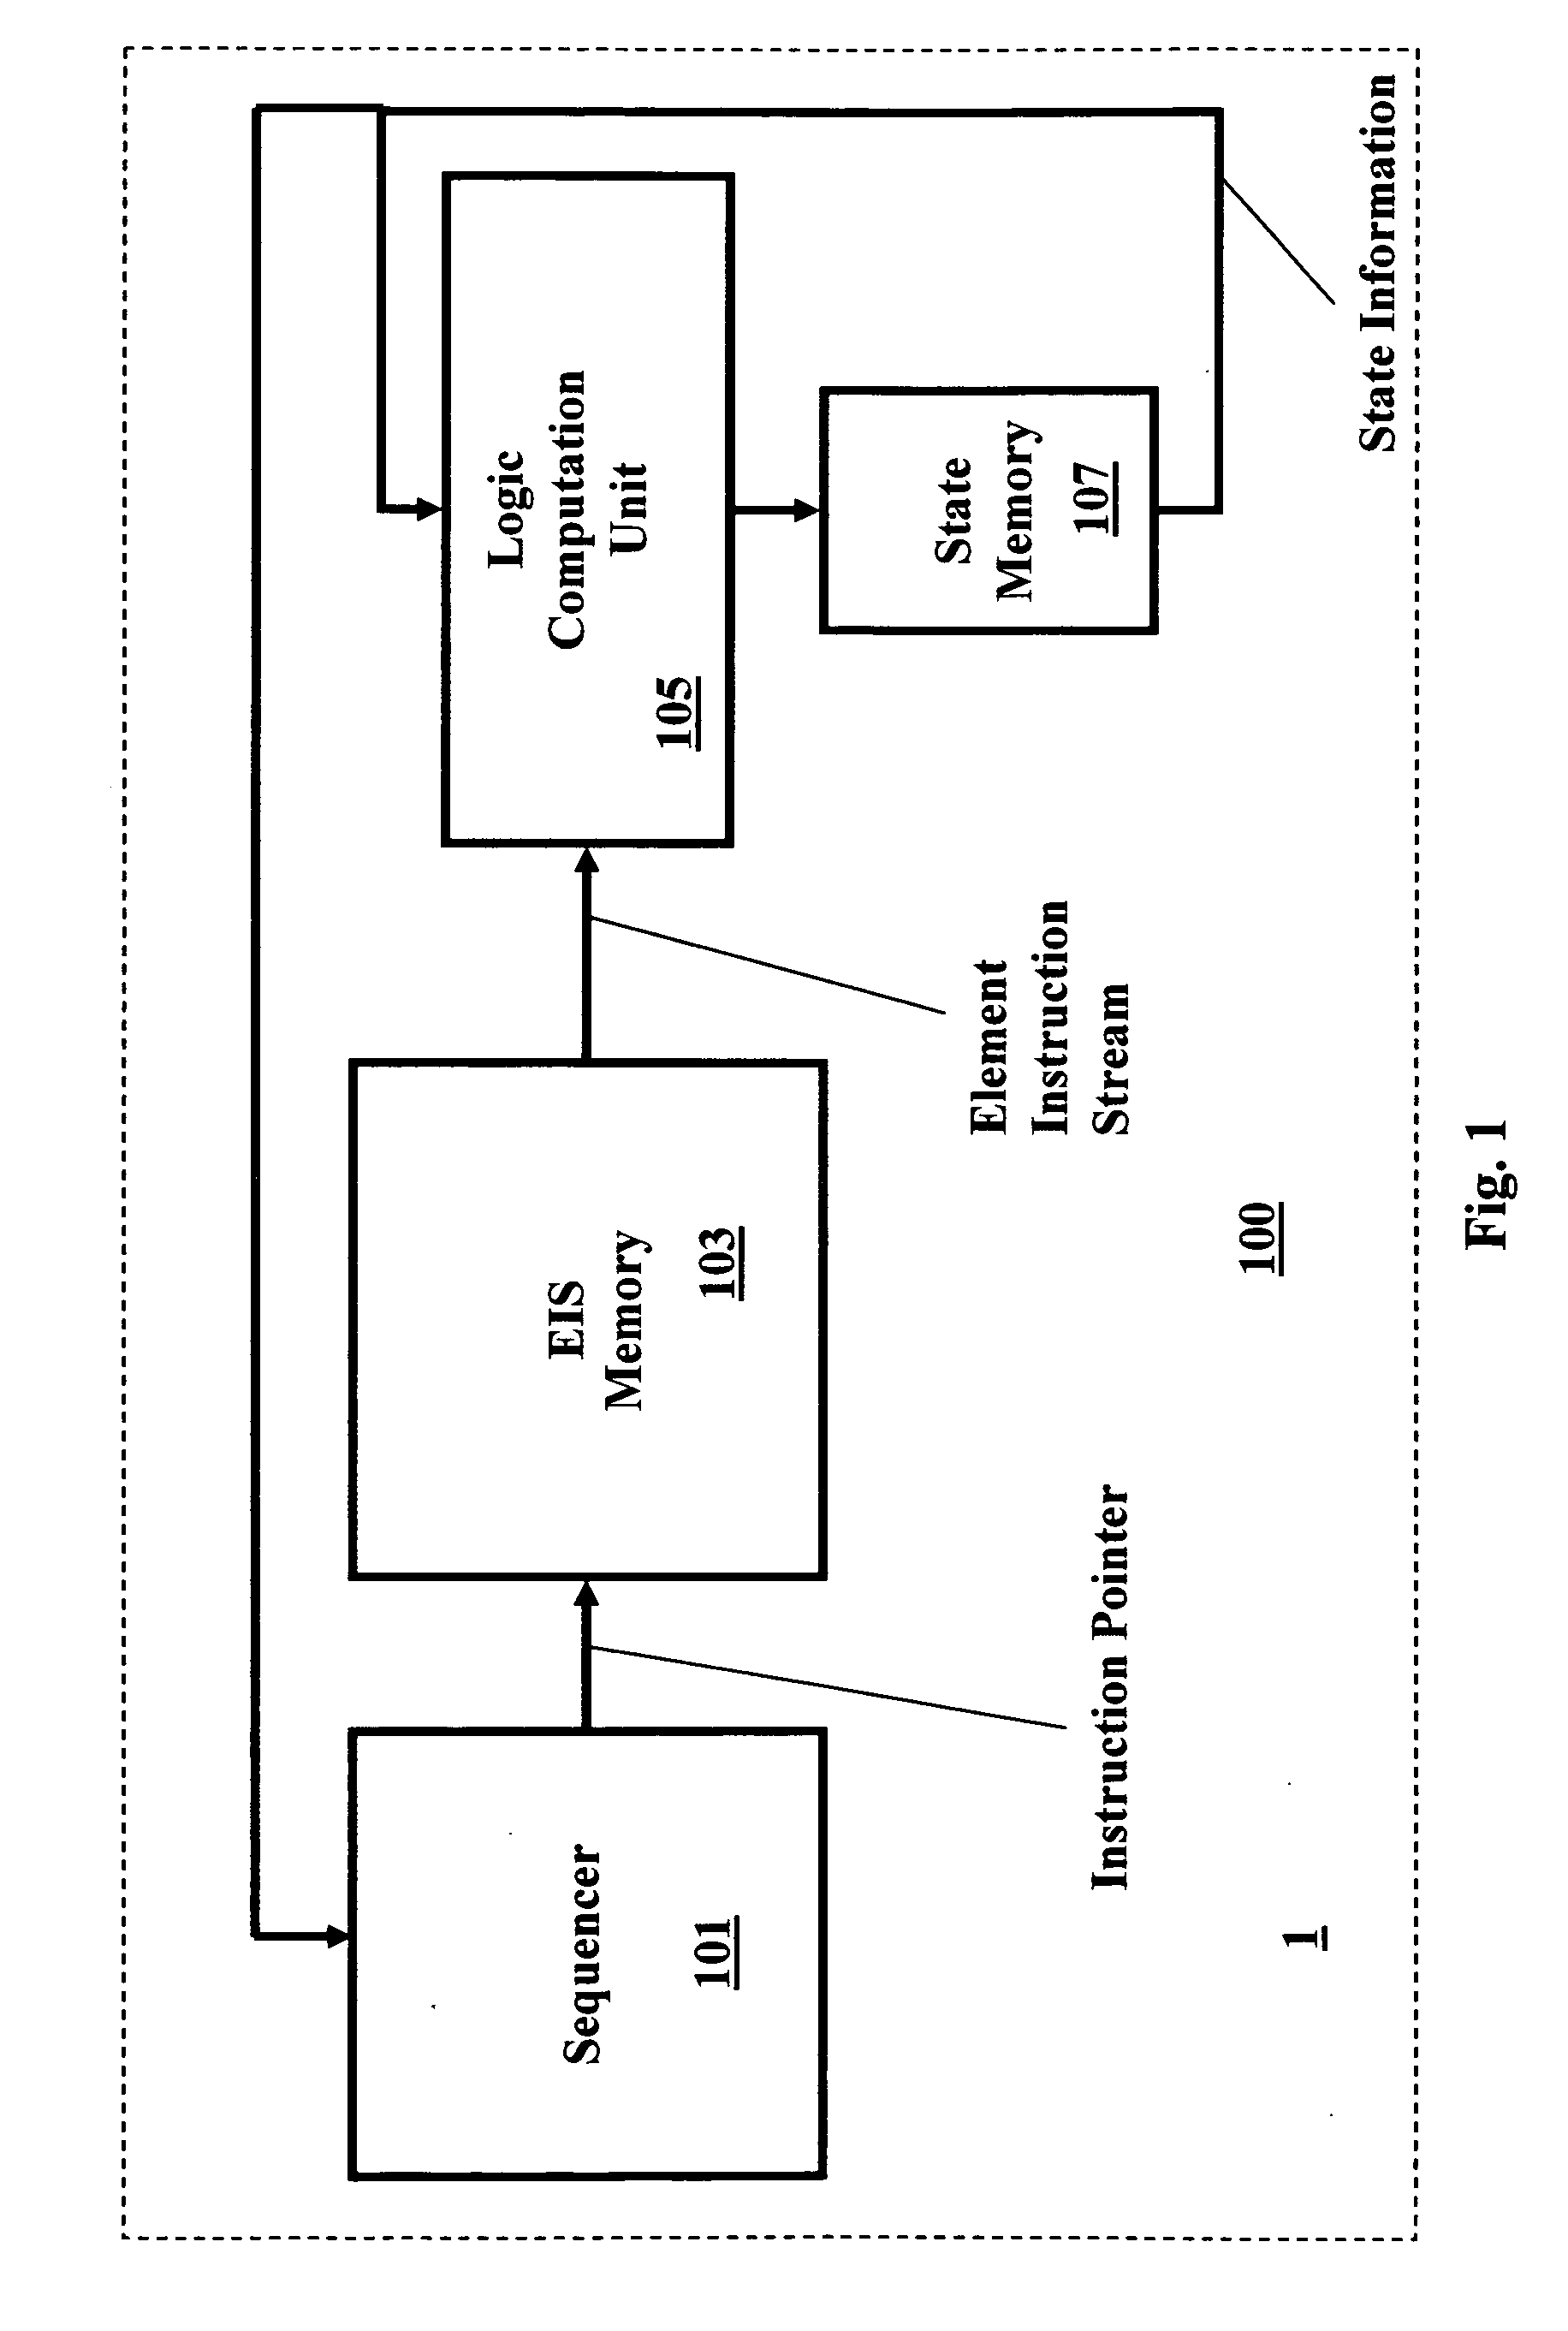 Programmable logic integrated circuit for digital algorithmic functions